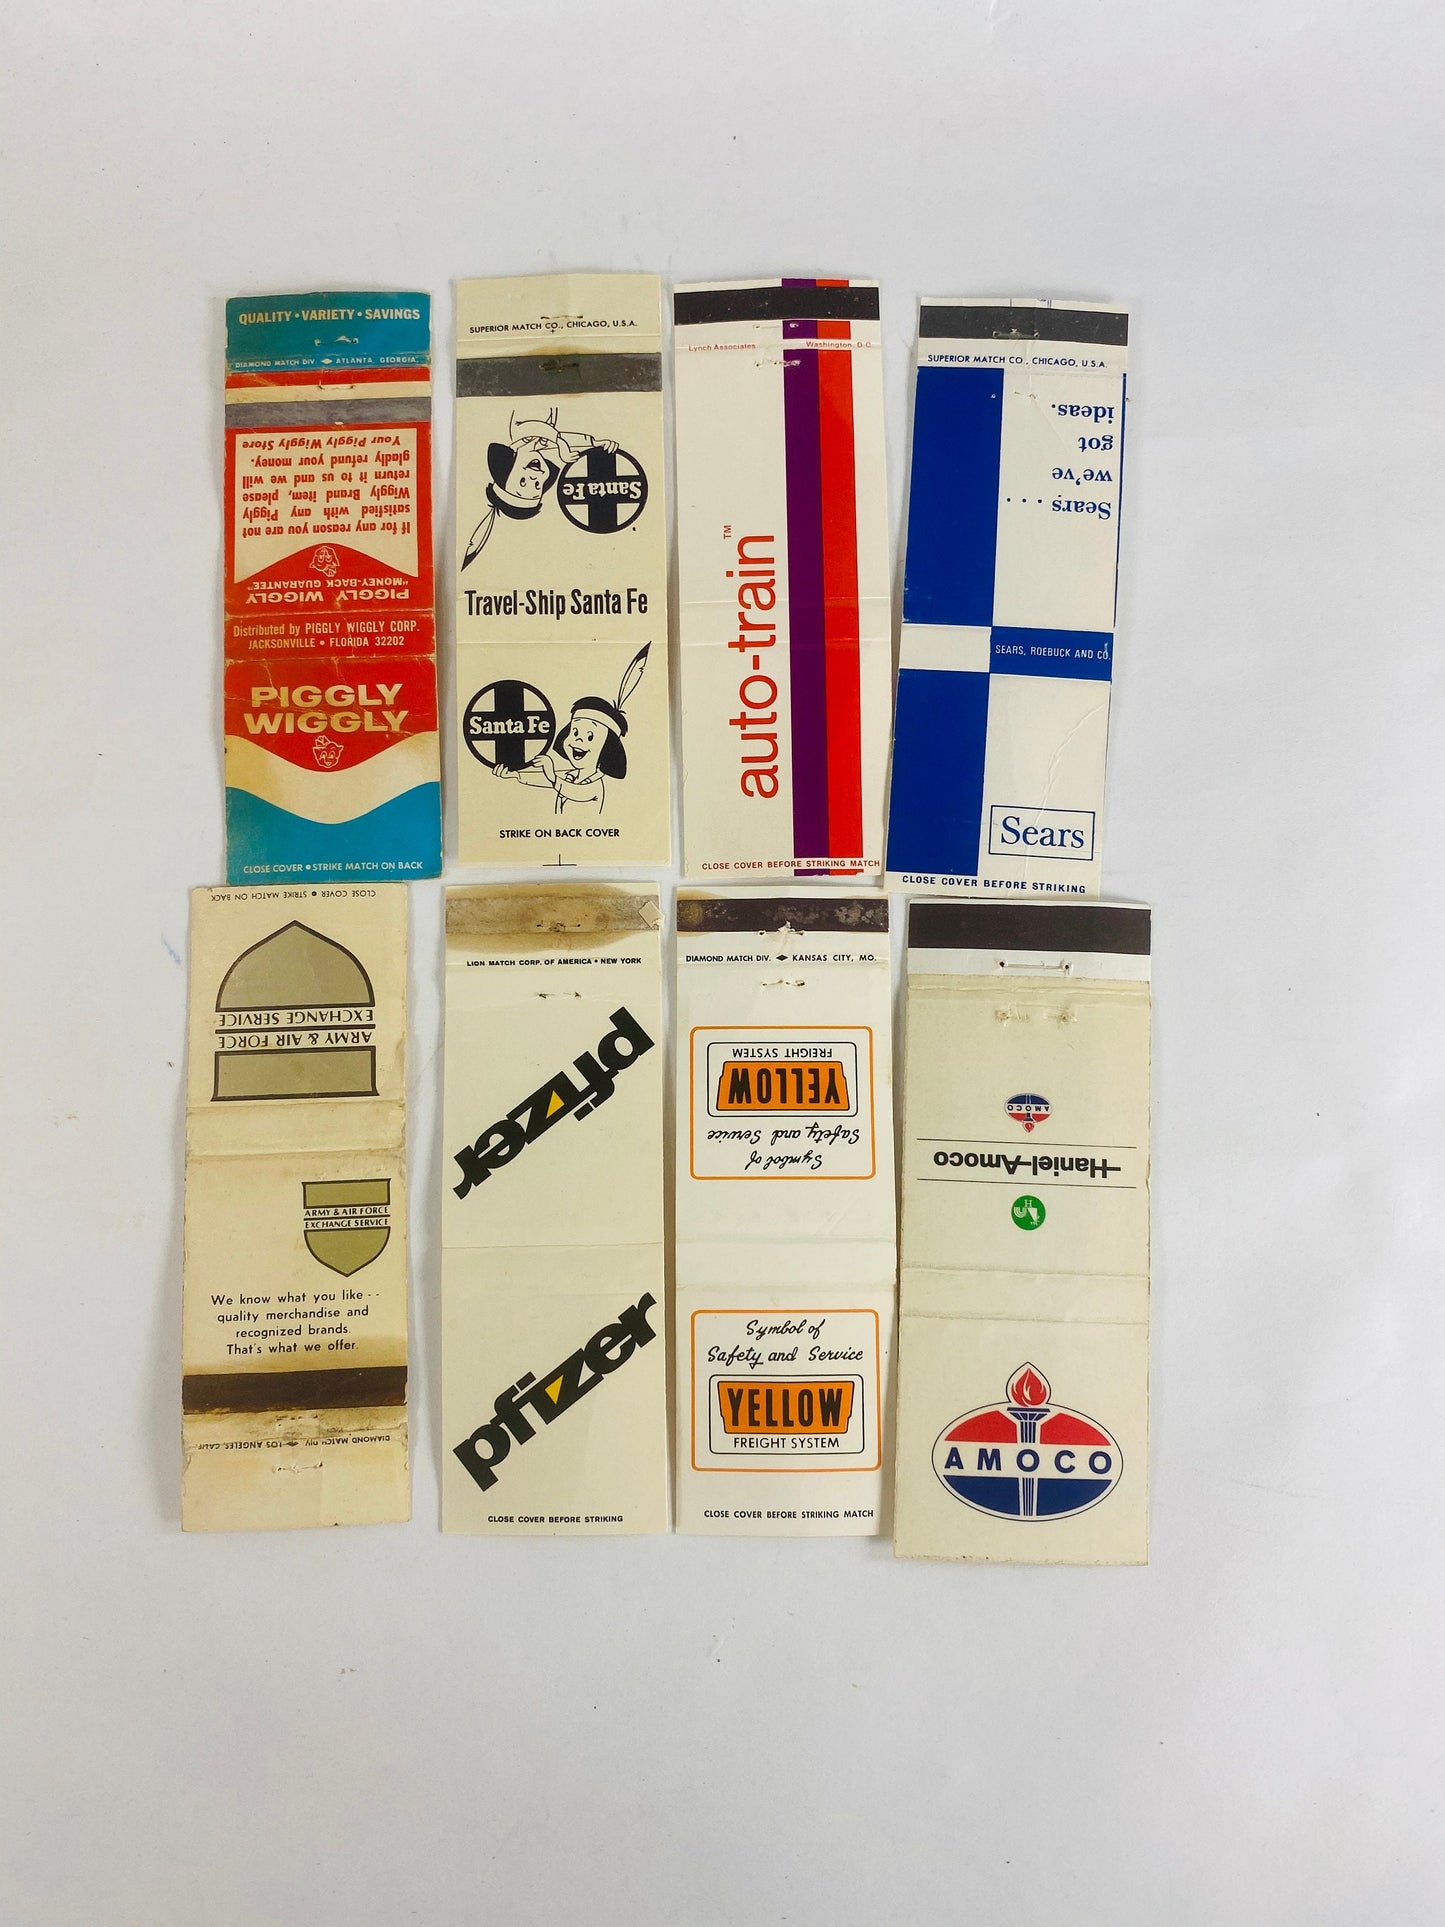 Army & Airforce Exchange Amoco Piggly Wiggly Pfizer Sears Vintage Matchbook cover lot Yellow Freight Auto-Train Merchant advertising